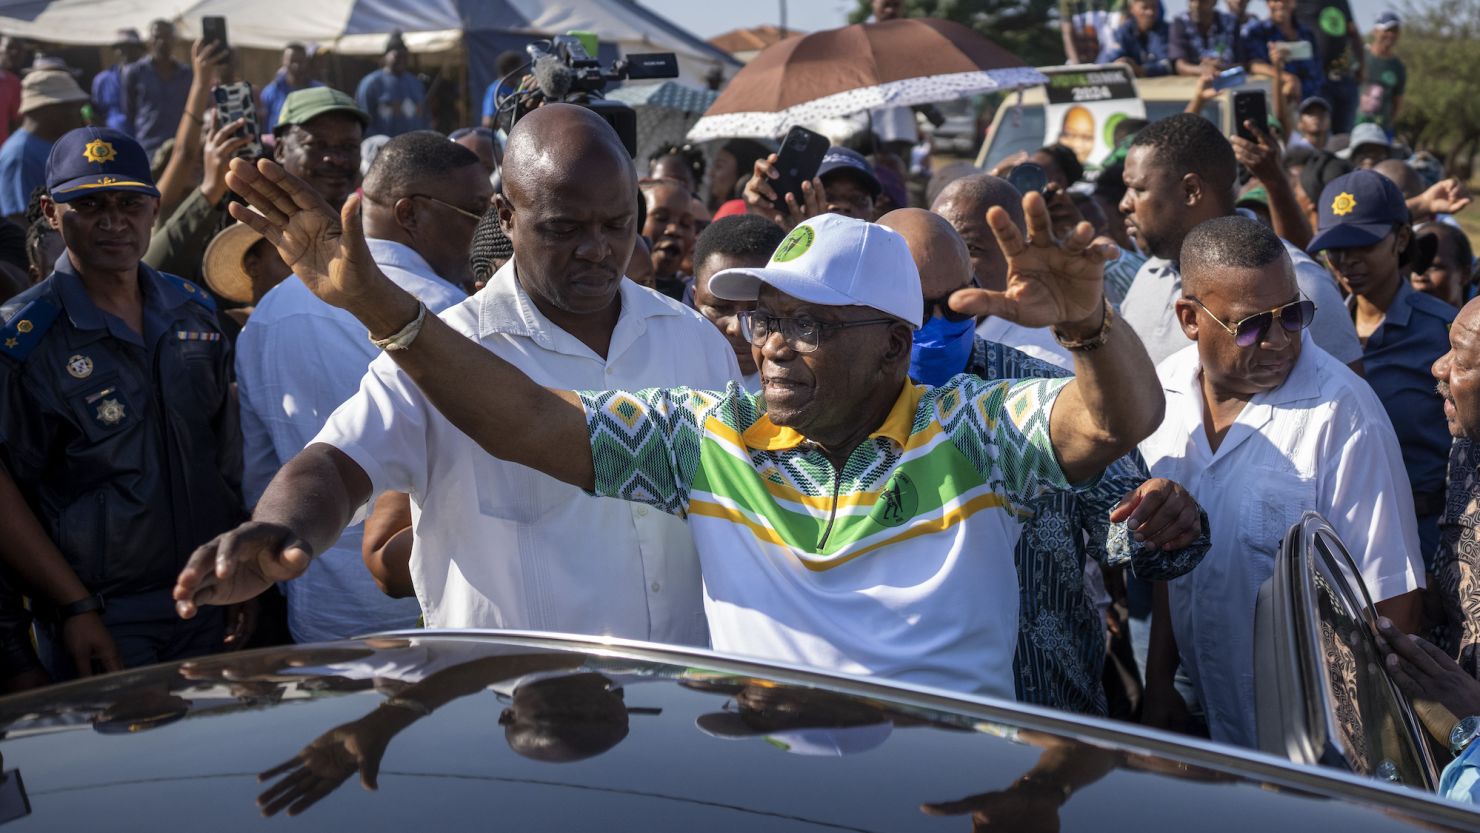 Former president of the ANC and South Africa Jacob Zuma, waves to supporters after casting his ballot on May 29 during general elections in Nkandla, Kwazulu Natal, South Africa.